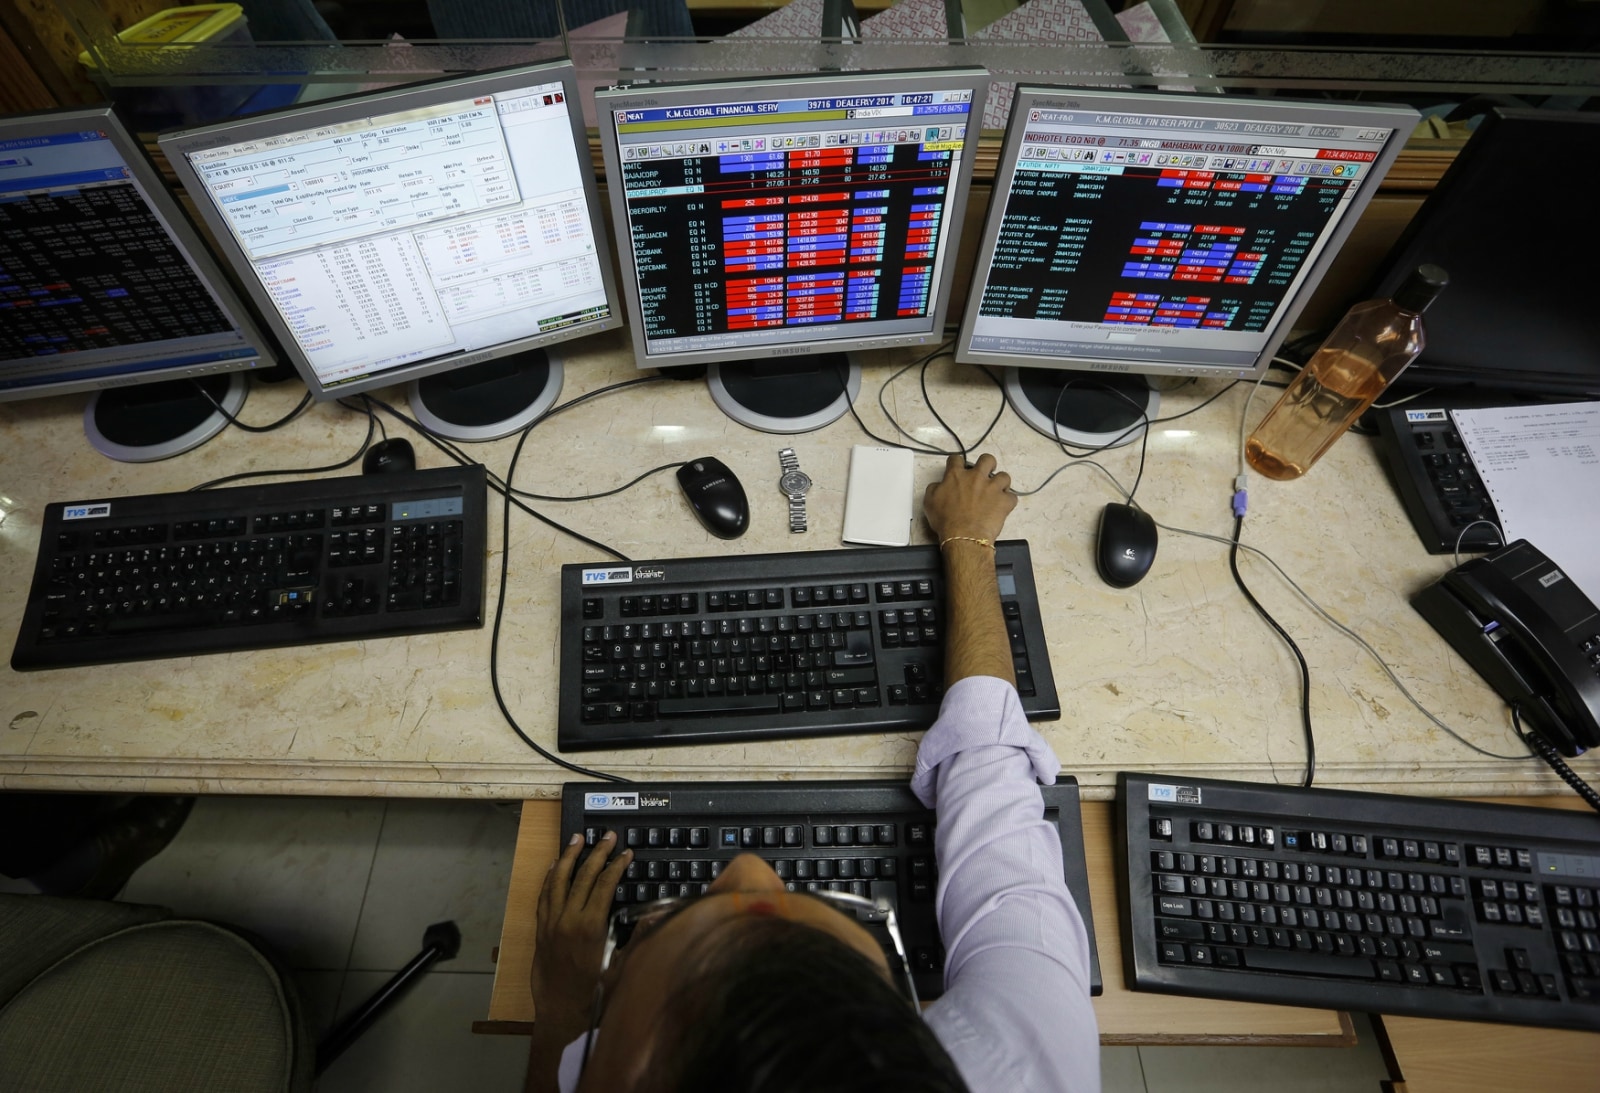 3. Market At Close On Friday: Indian benchmark indices, Sensex and Nifty erased day's gains to end Friday's volatile session lower, dragged by selling in banking and financial stocks. At the close of trade, the Sensex fell 134.03 points or 0.34 percent to 38,845.82 while the Nifty declined 11.15 points or 0.10 percent to 11,504.95. Broader indices, Nifty Midcap100 and Nifty Smallcap100 declined 0.07 and 0.44 percent, respectively. For the week, Sensex ended flat while Nifty was up 0.5 percent. Nifty Bank fell 1.9 percent. Midcap Index outperformed the benchmarks with gains of almost 4 percent. Selling in banking heavyweights such as HDFC Bank, Kotak Mahindra Bank, SBI, among others dragged Nifty Bank over 1 percent. (Image: Reuters)